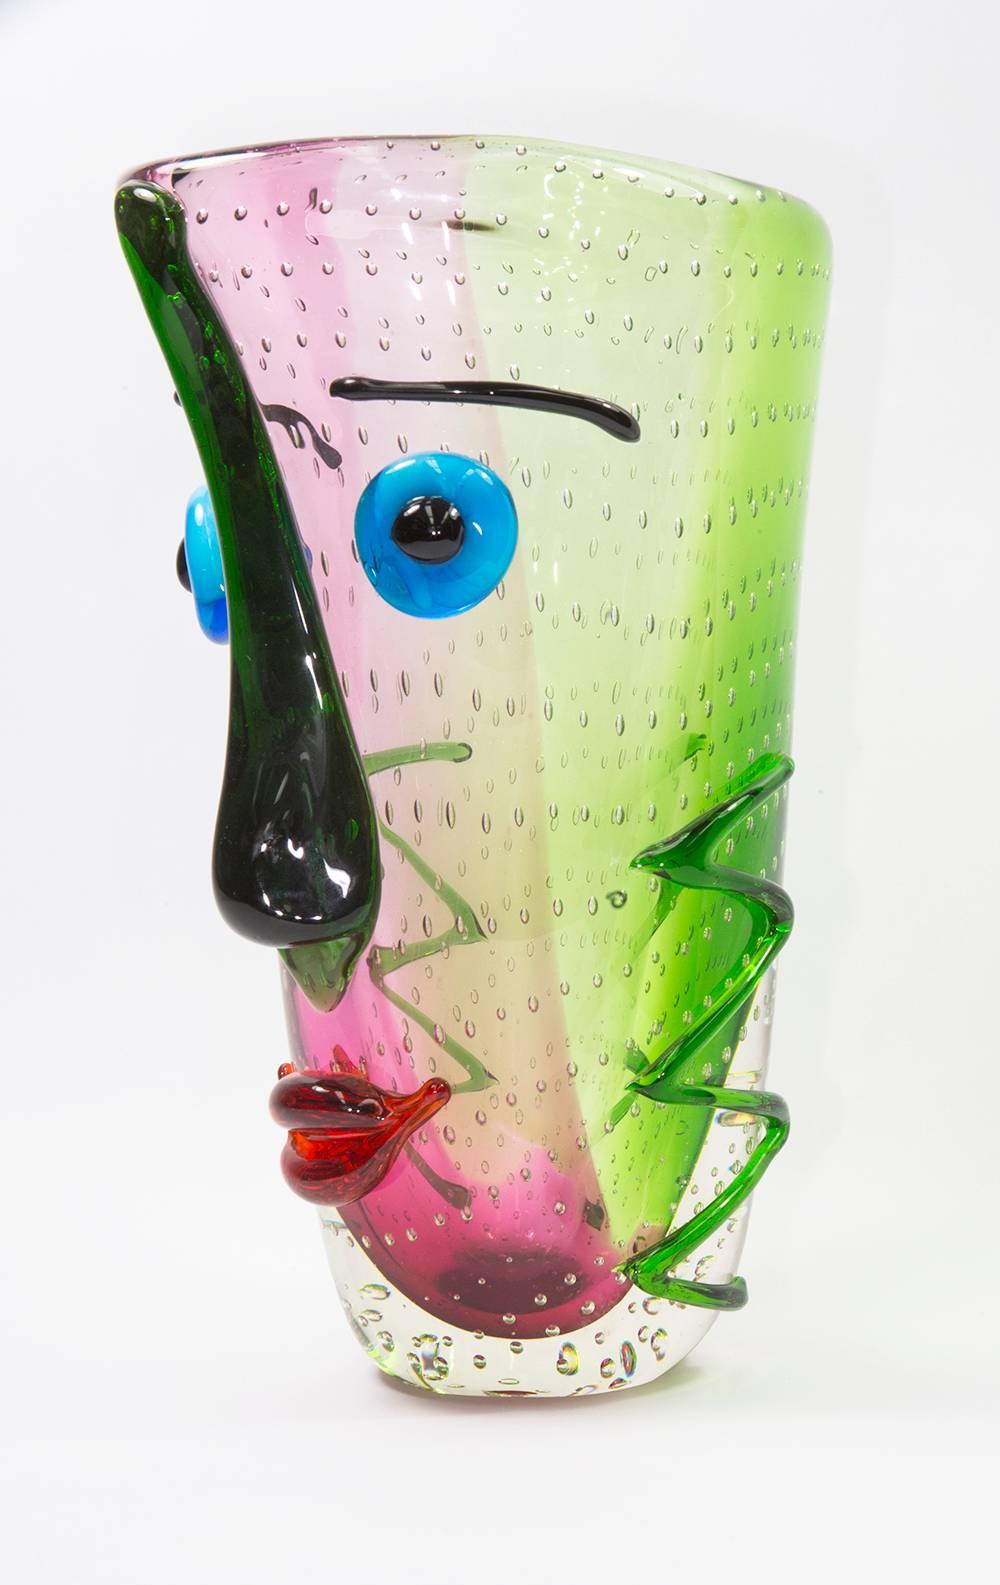 For the lovers of Murano abstract glass this is a world class piece of art abstract glass at its best. A magnificent and very eye catching vase with very distinctive face design inspired by Picasso; made with multi Sommerso colors and bullicante